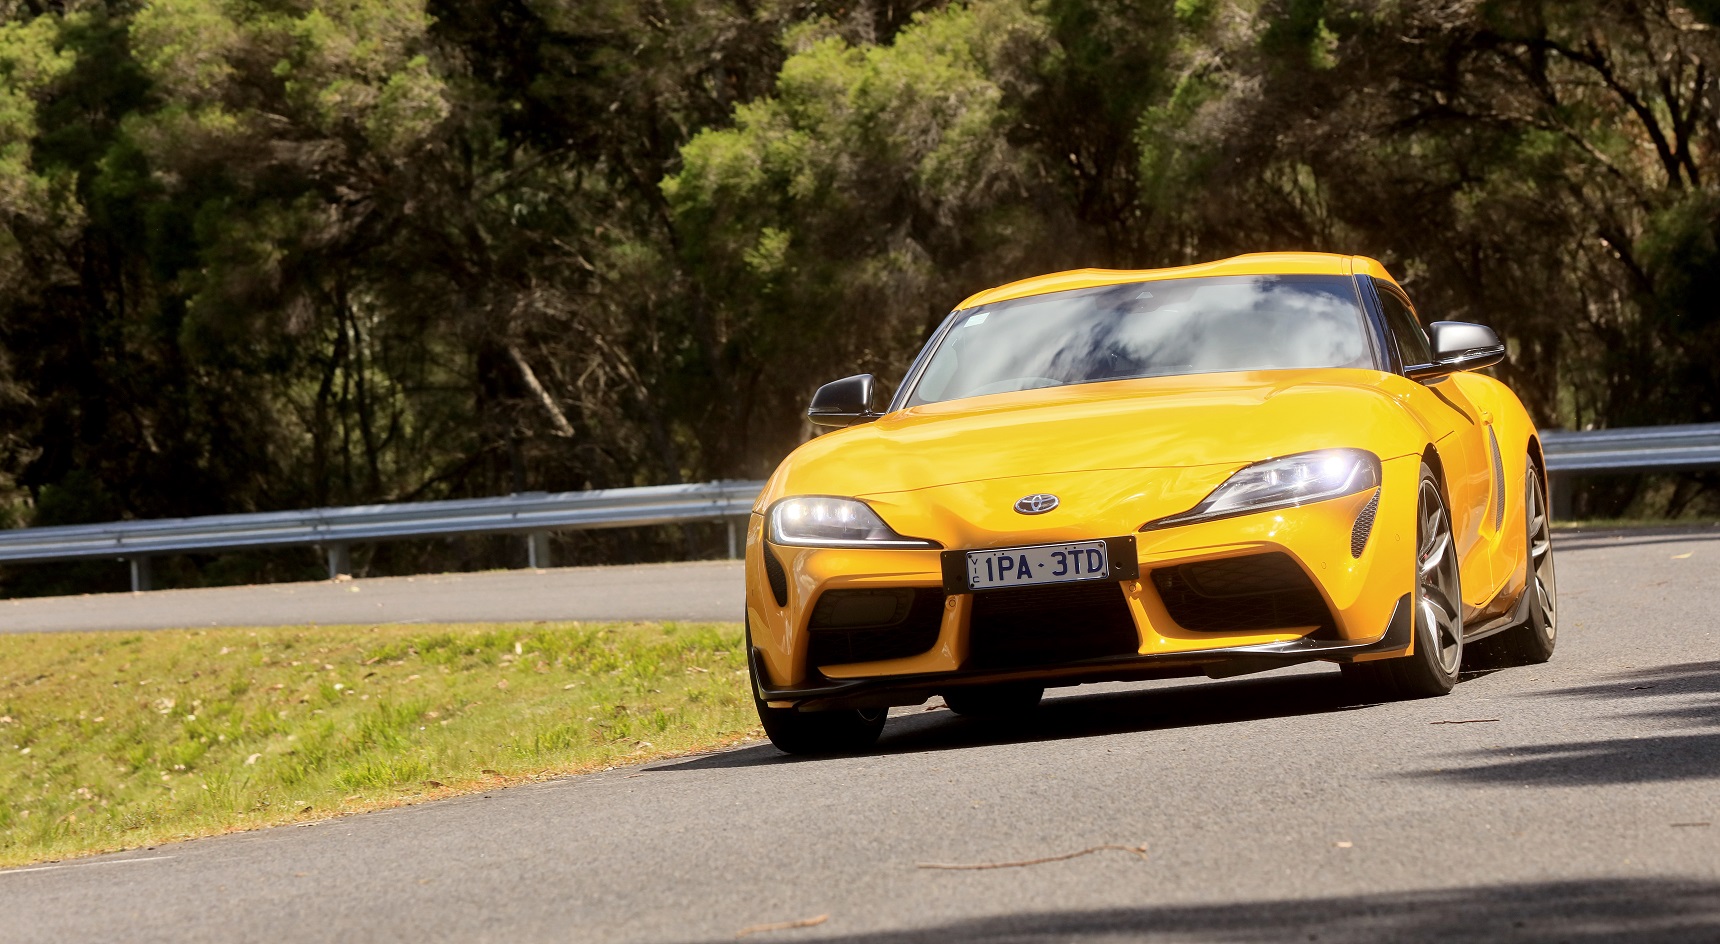 Judges were impressed by the Supra's on-road skills.